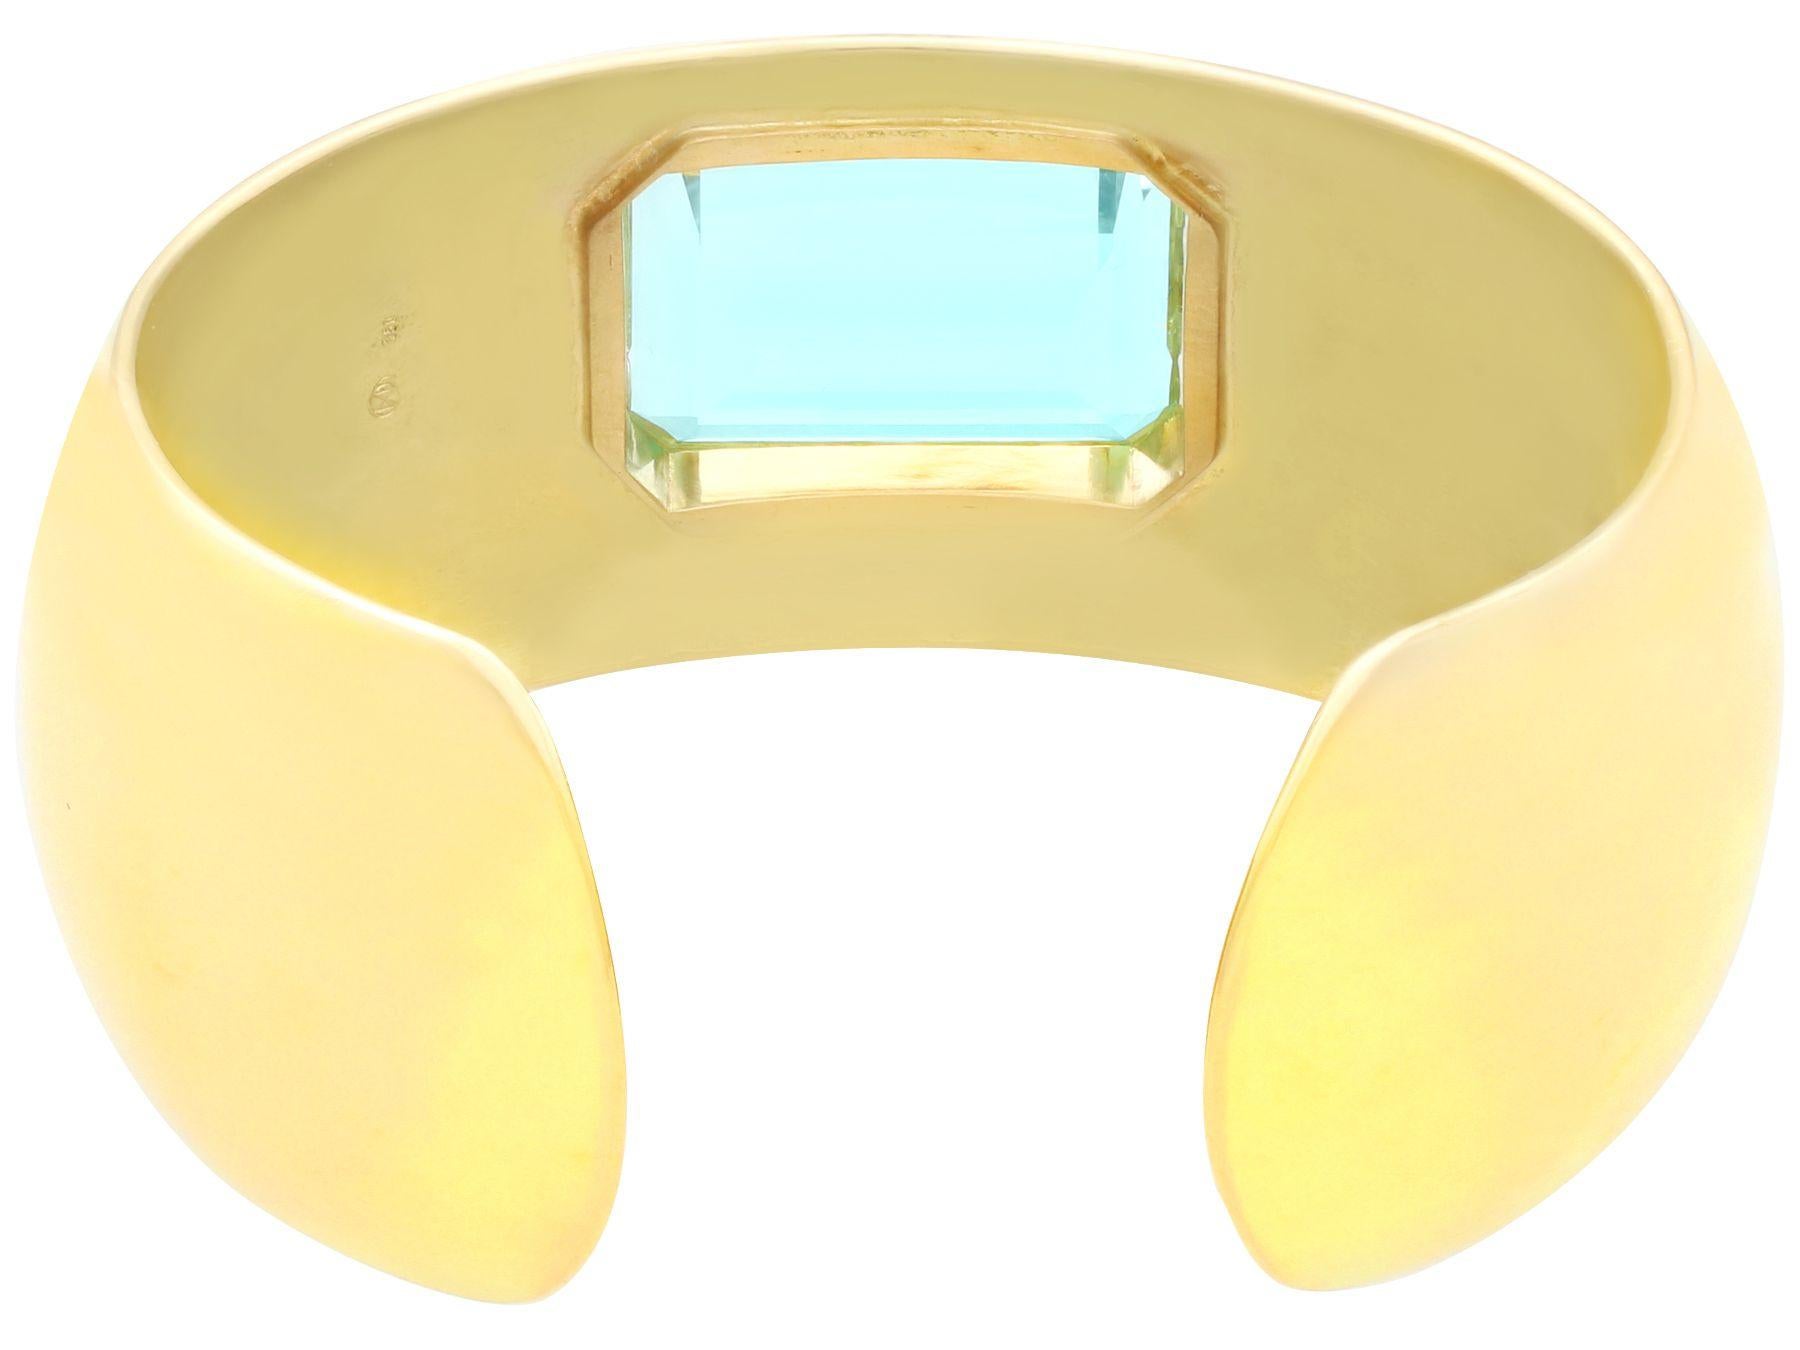 Vintage 40.35Ct Aquamarine and 18k Yellow Gold Cuff Bangle Circa 1980 In Excellent Condition For Sale In Jesmond, Newcastle Upon Tyne